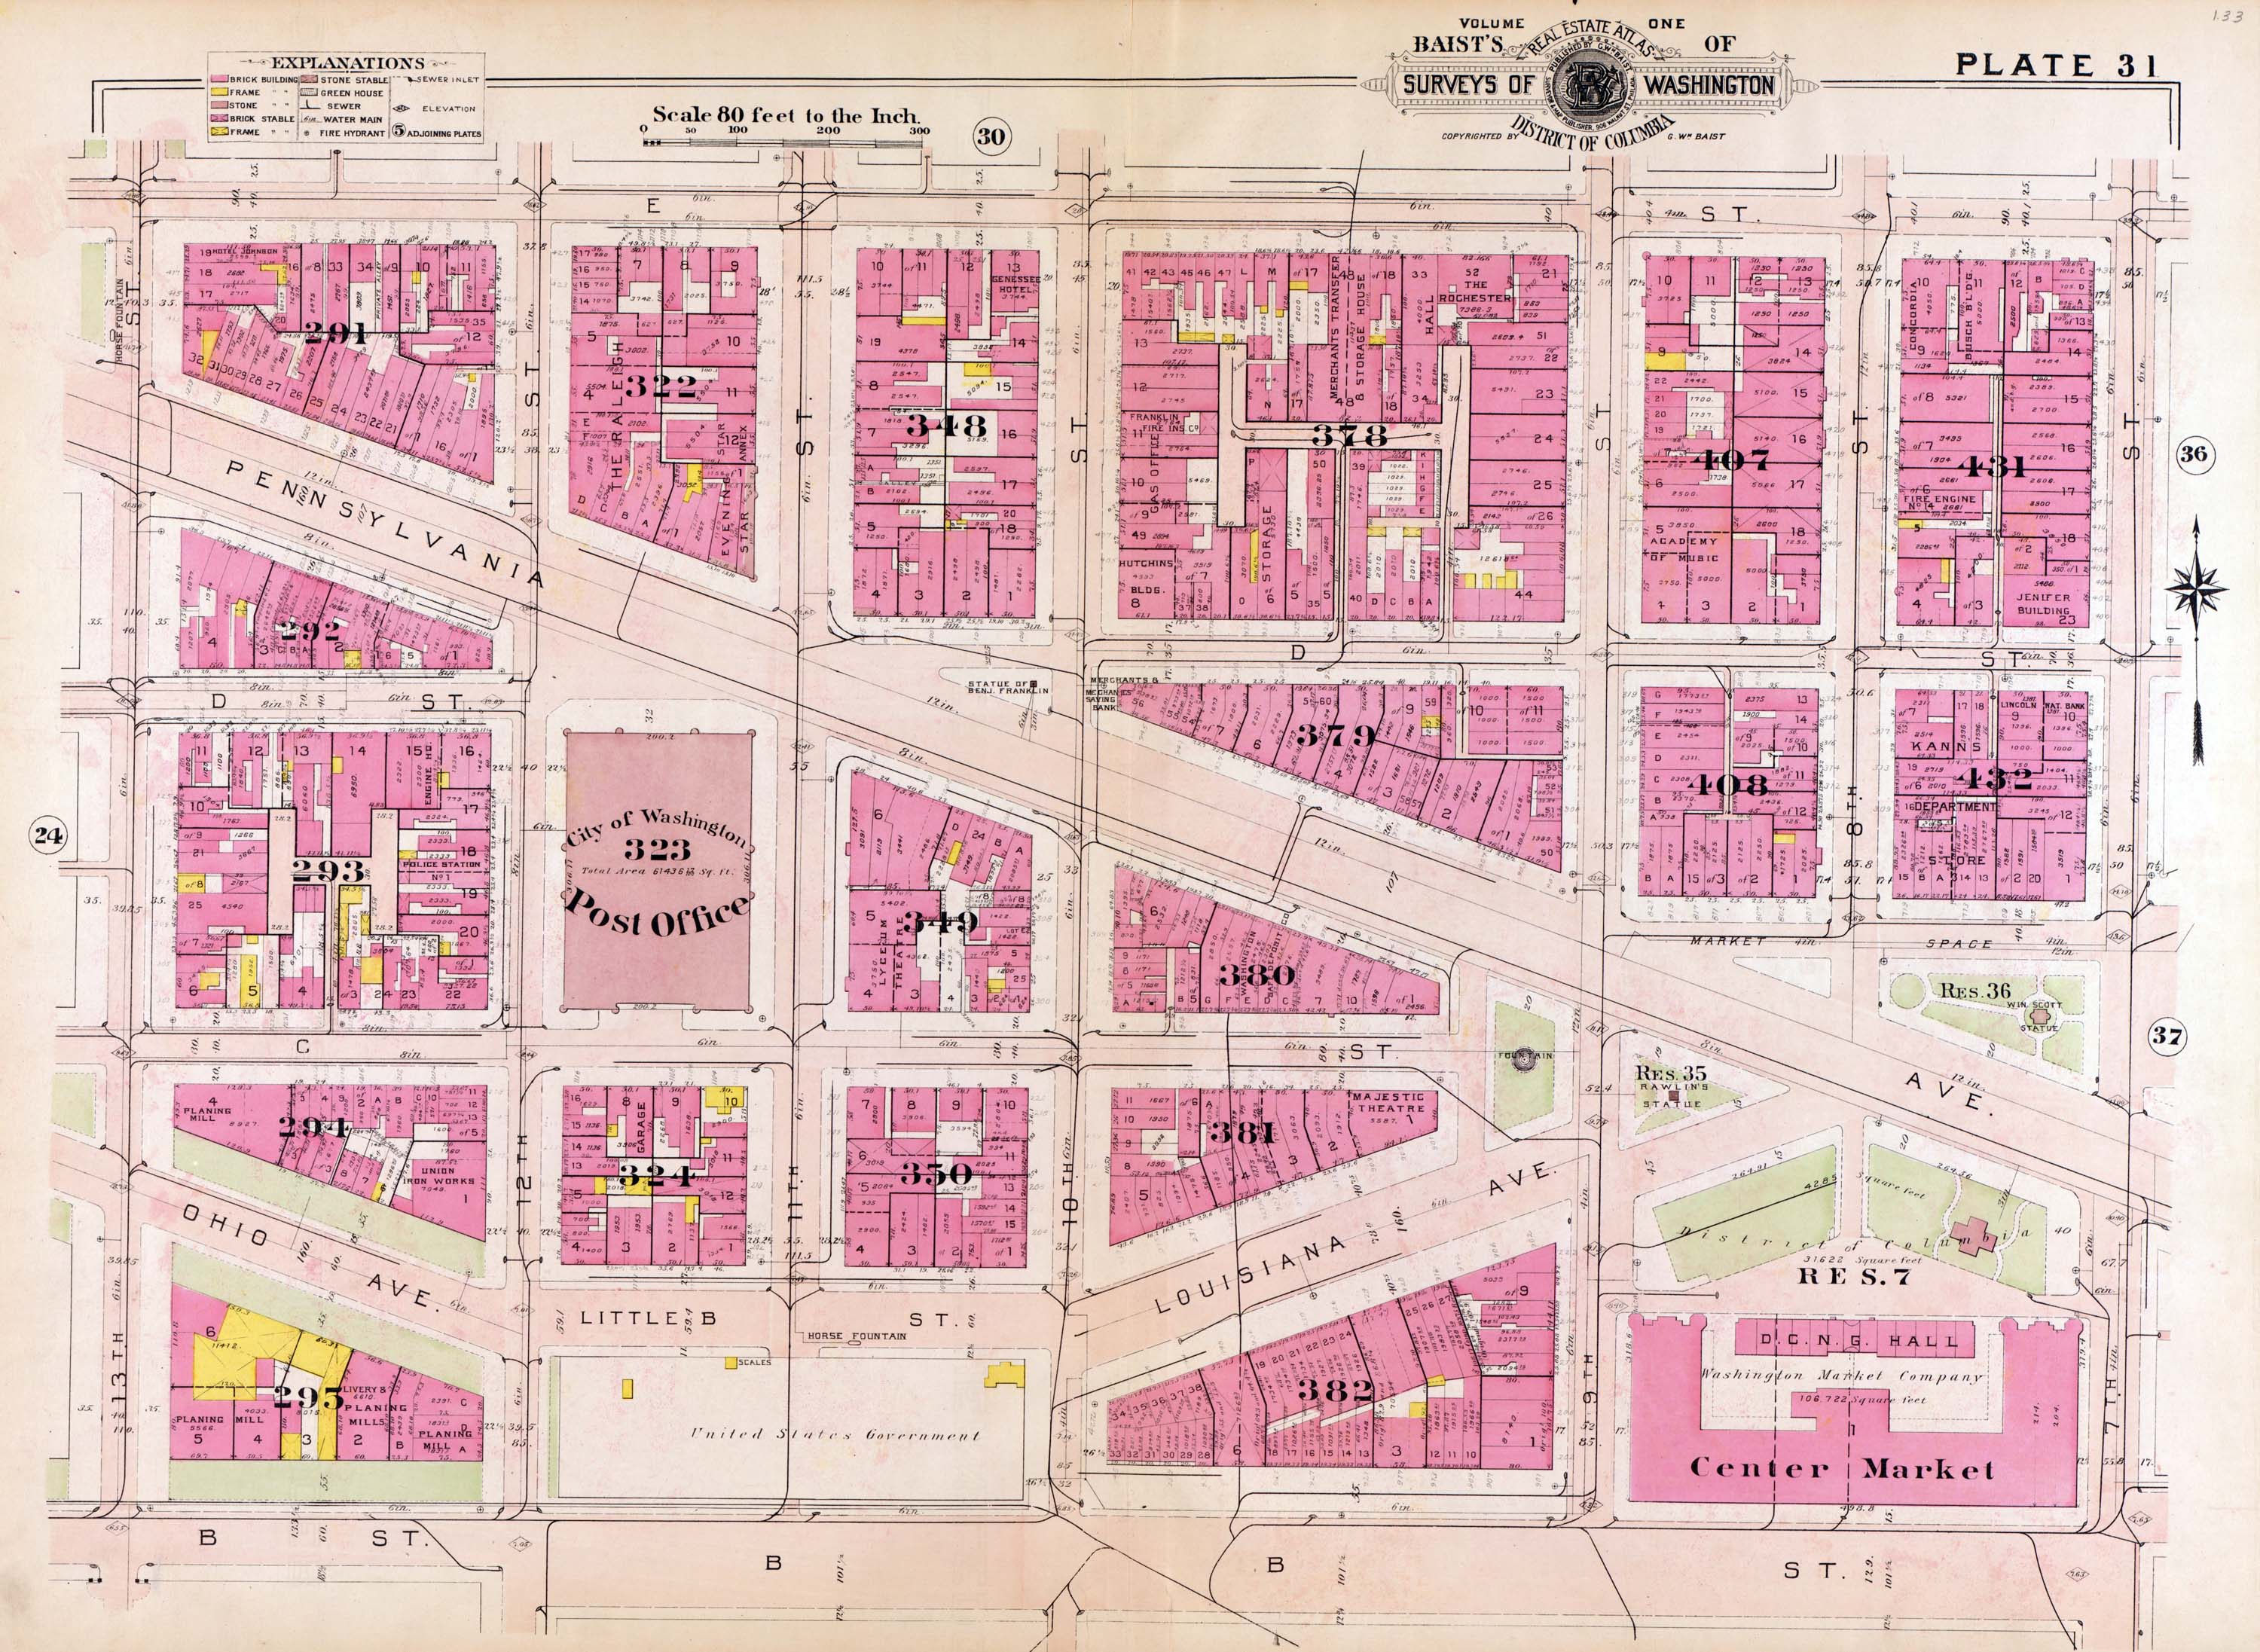 Plate 31 from 1909 Baist's Real Estate Atlas.  This shows the original street layout in the area that would eventually become Federal Triangle.  Of note to Shorpy photographs is the location of Louisiana Avenue, Center Market, and the Old Post Office.